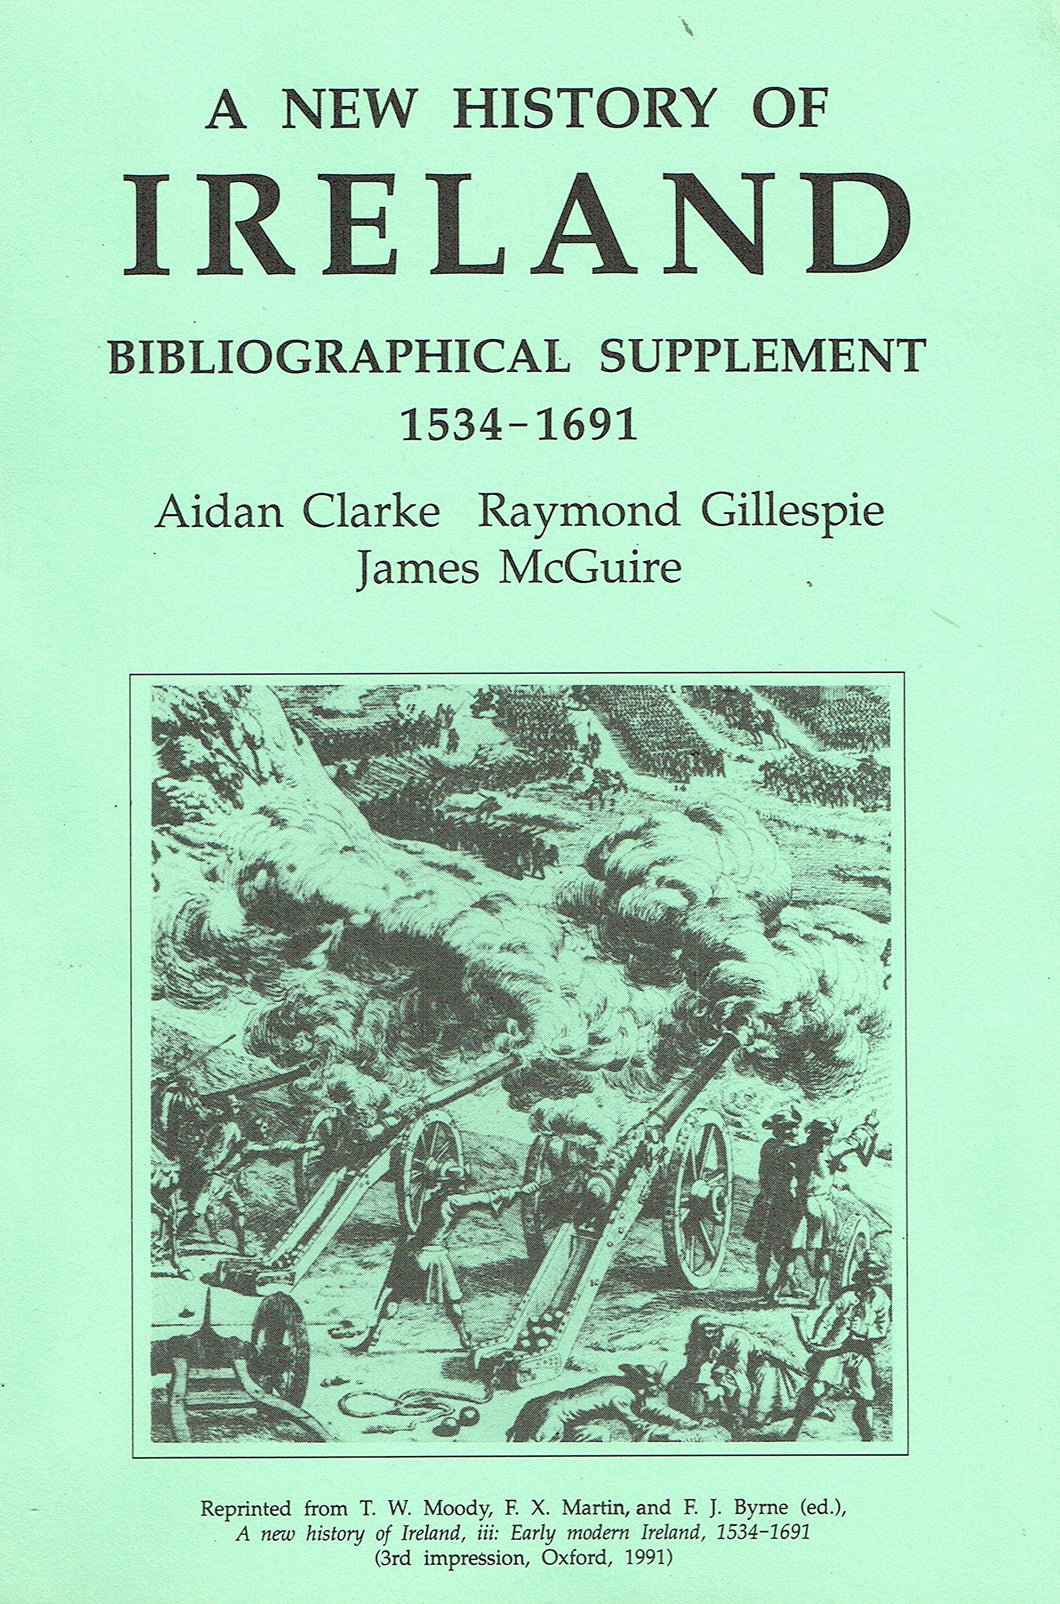 A New History of Ireland: Bibliographical Supplement, 1534-1691